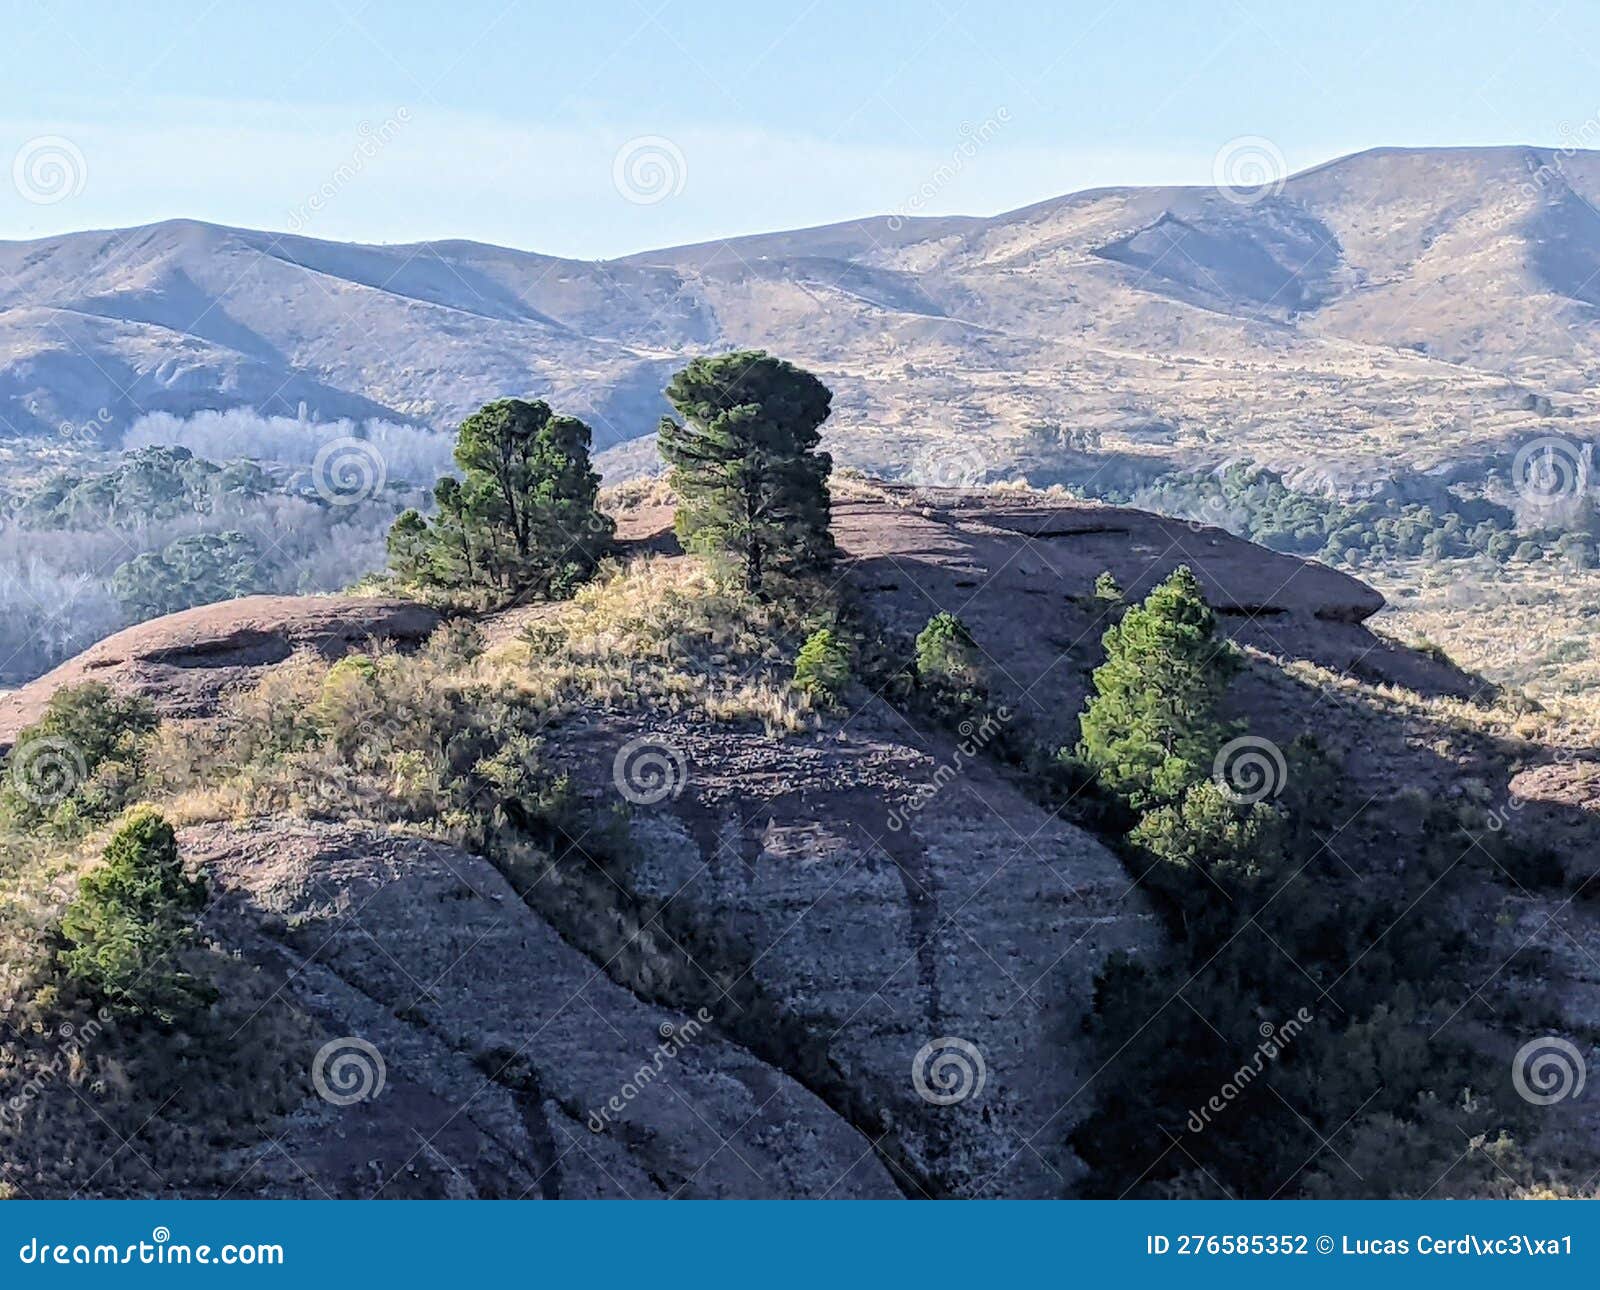 mountain landscapes of ongamira in the cordoba mountains, argentina